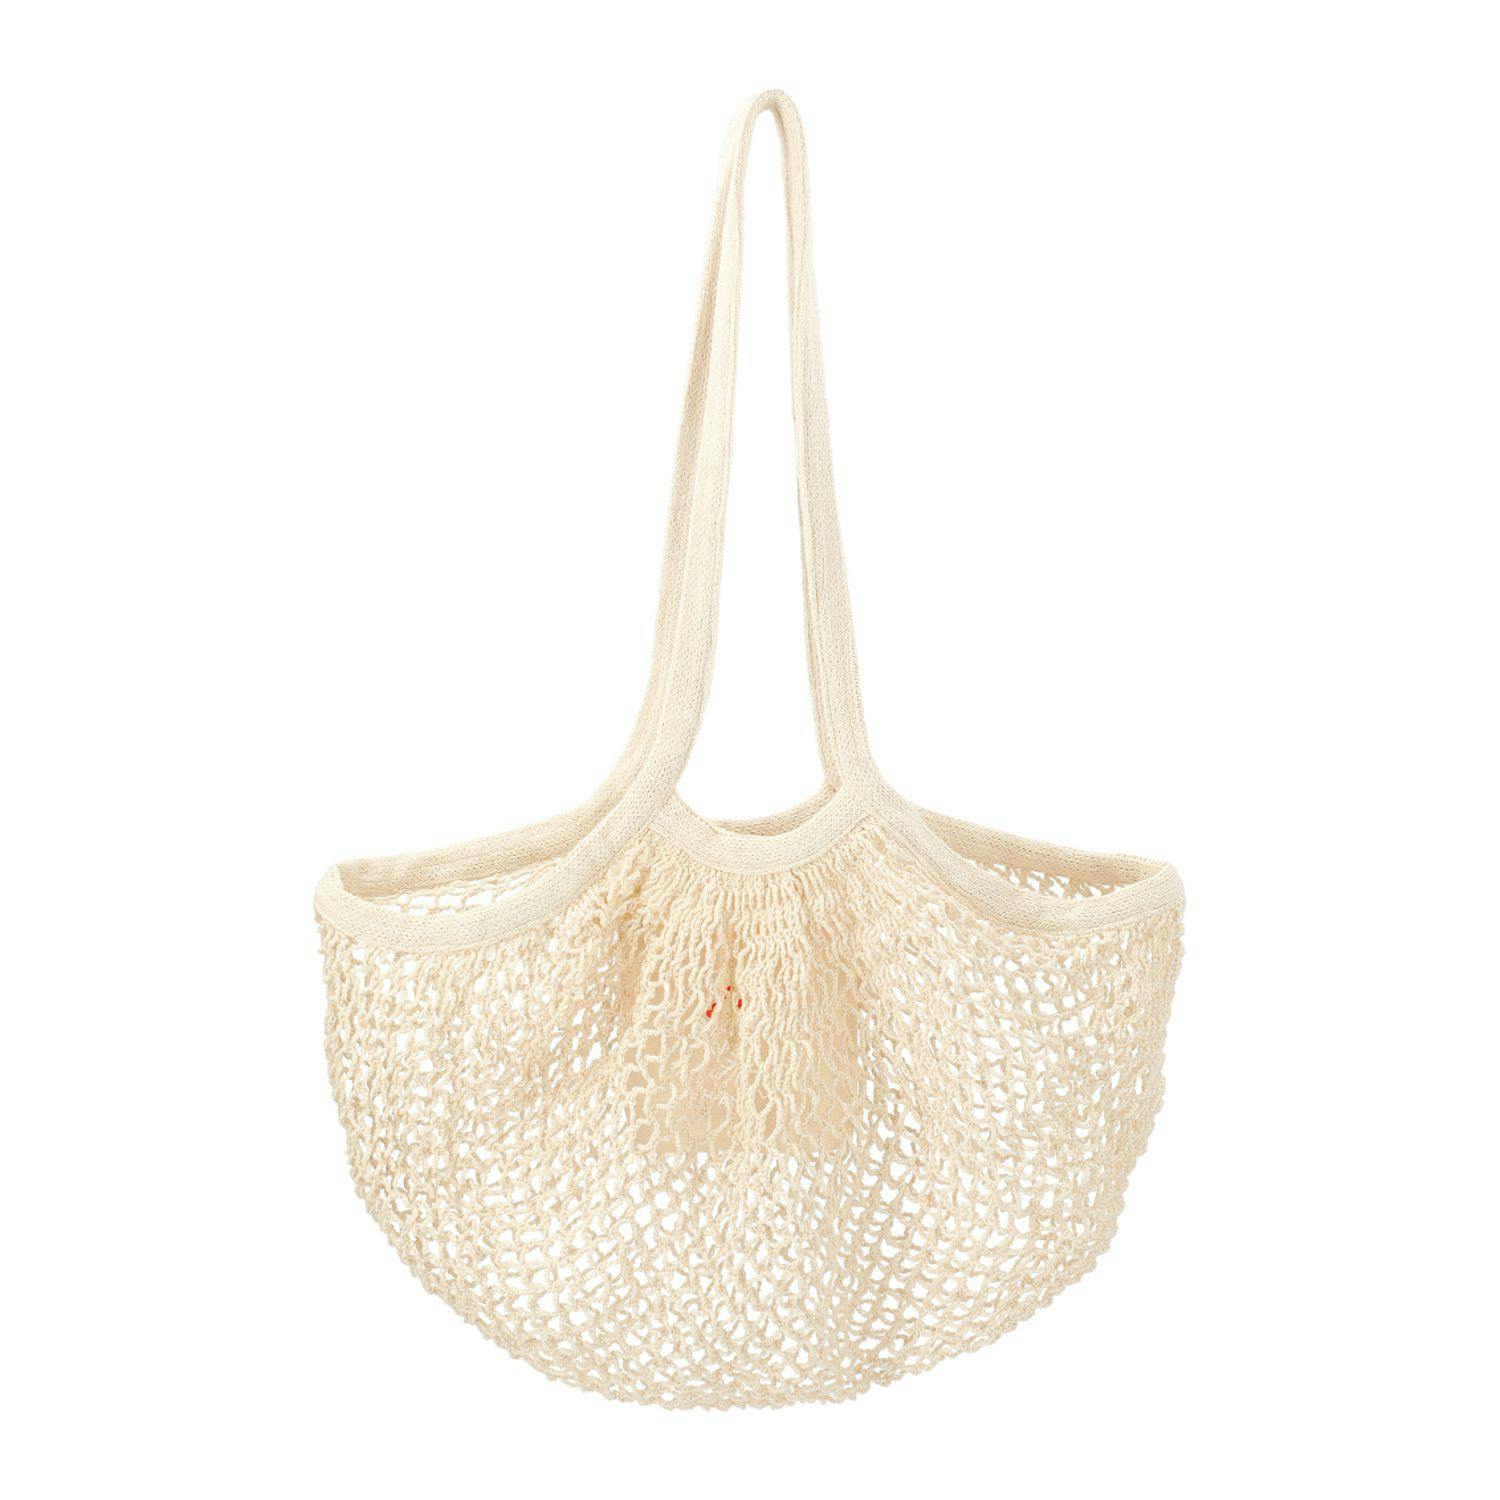 Riviera Cotton Mesh Market Bag w/Zippered Pouch - additional Image 1